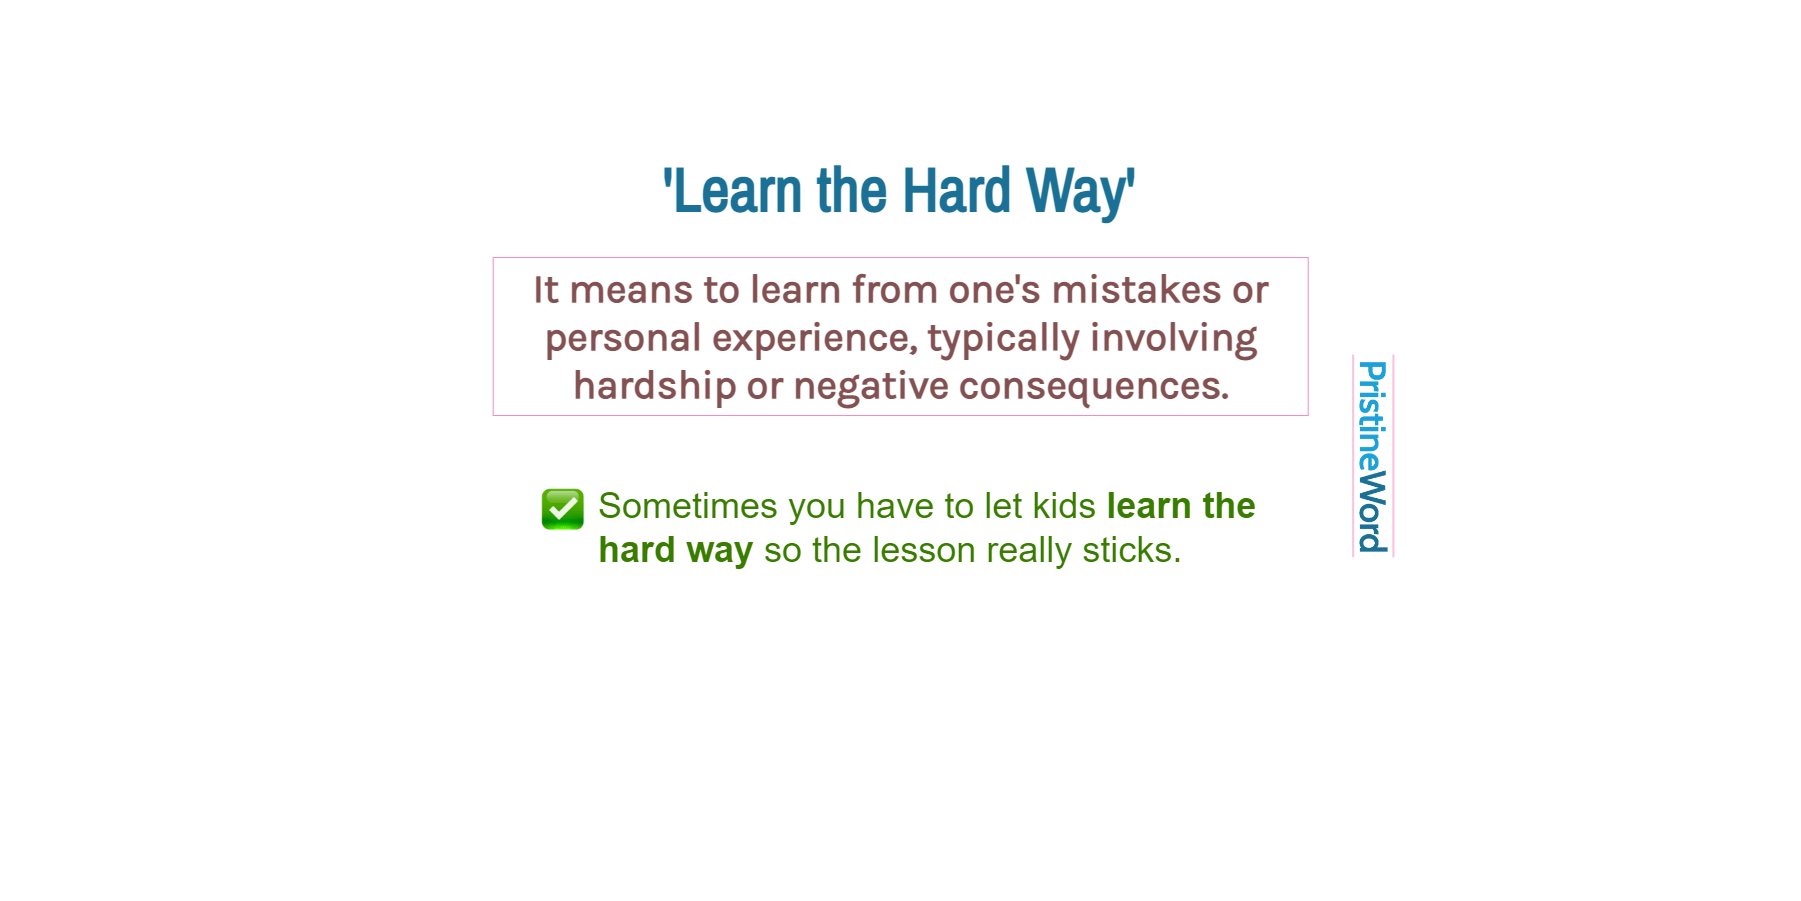 'Learn the Hard Way': Meaning and Usage